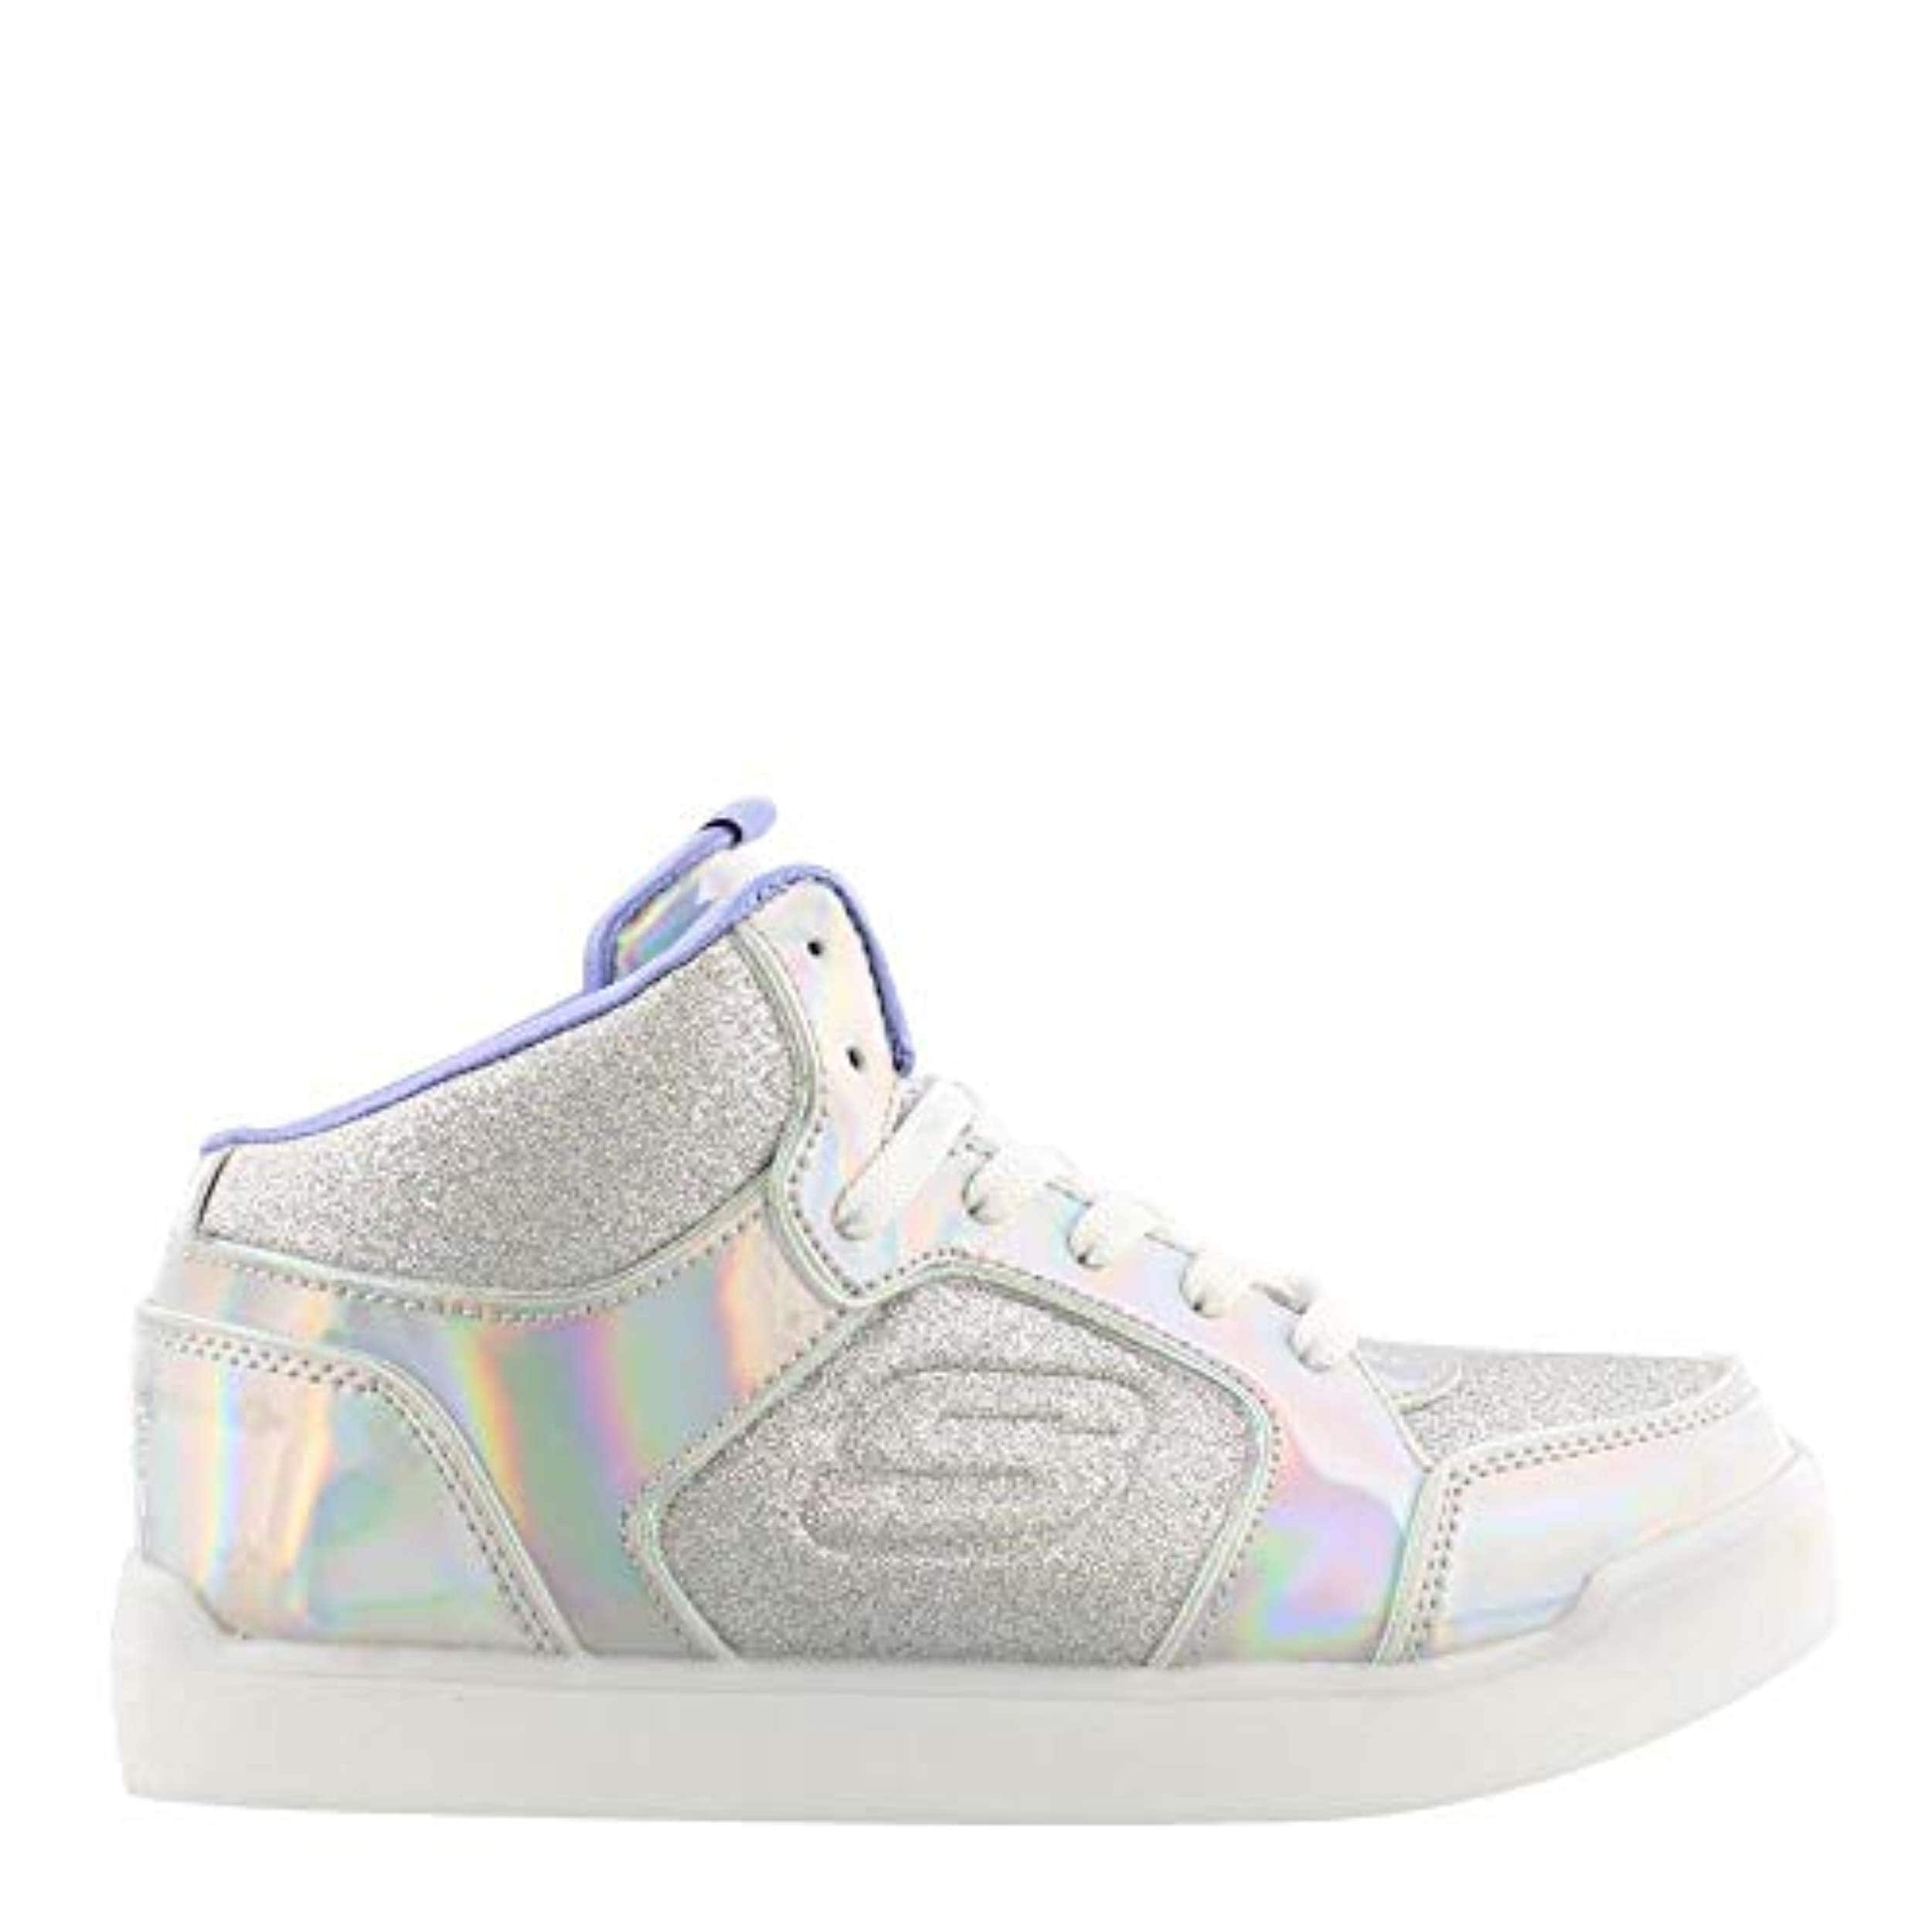 skechers silver light up shoes